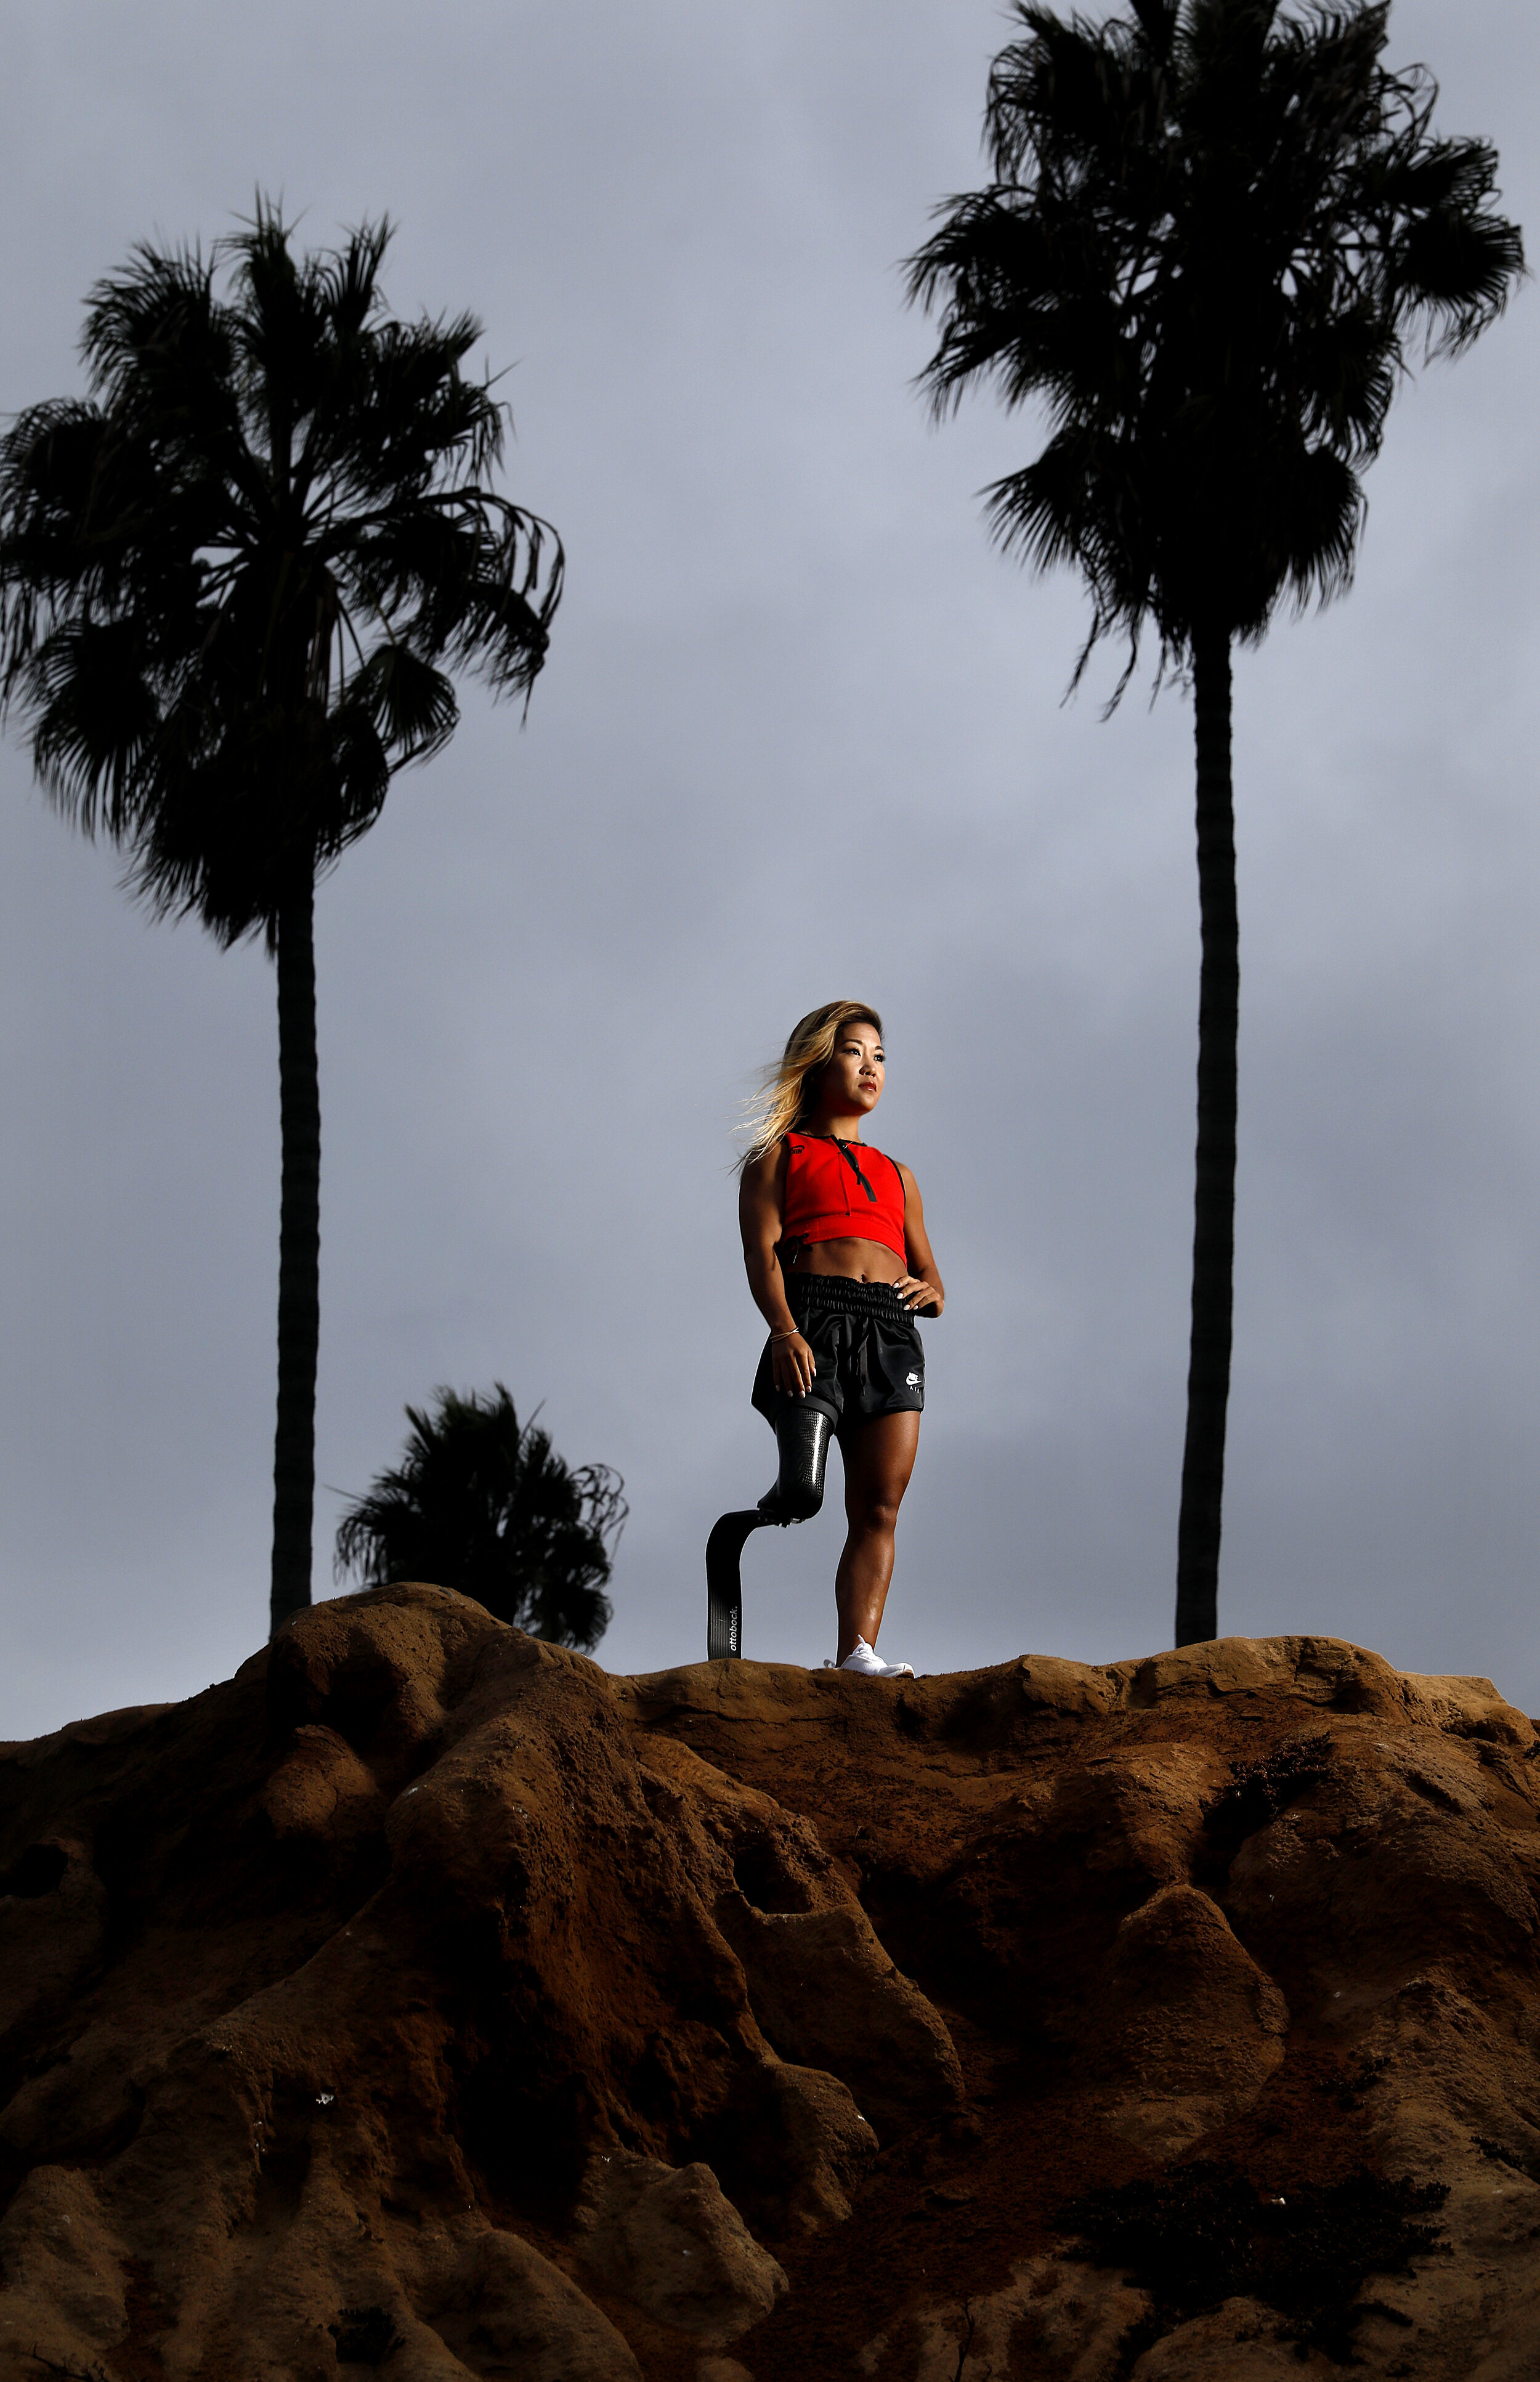  Paralympian Scout Bassett is photographed at Sunset Cliffs in San Diego, California. Bassett works with the Challenged Athletes Foundation, the organization that put her on the track, to fight for equality in sports. As an infant in China, she lost 